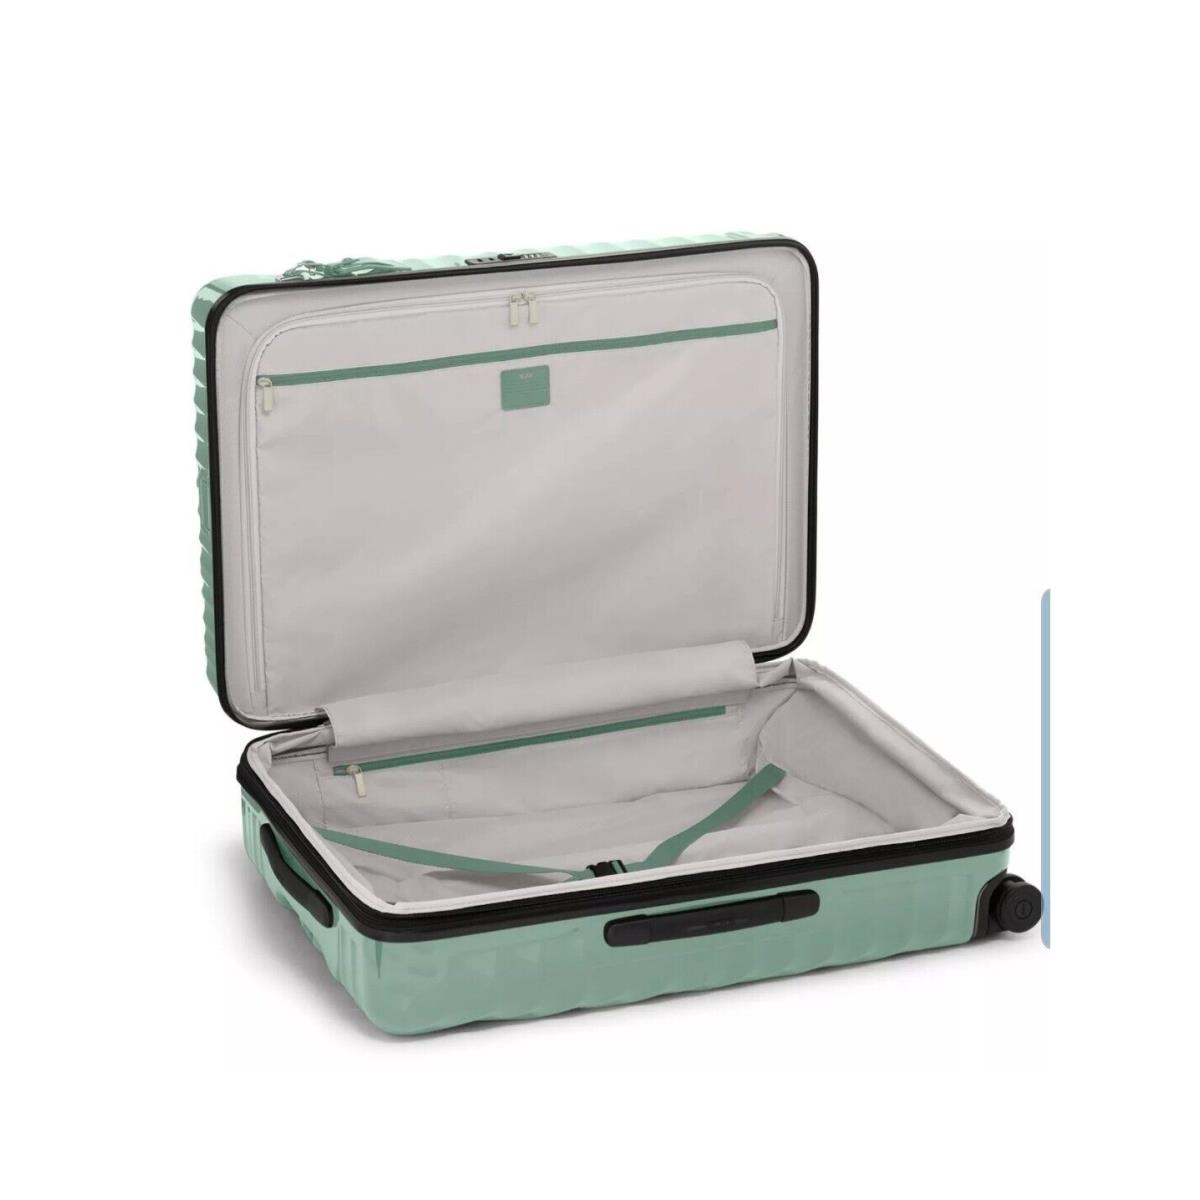 Tumi Extended Trip Expandable 4 Wheeled Packing Case in Seagrass Mint